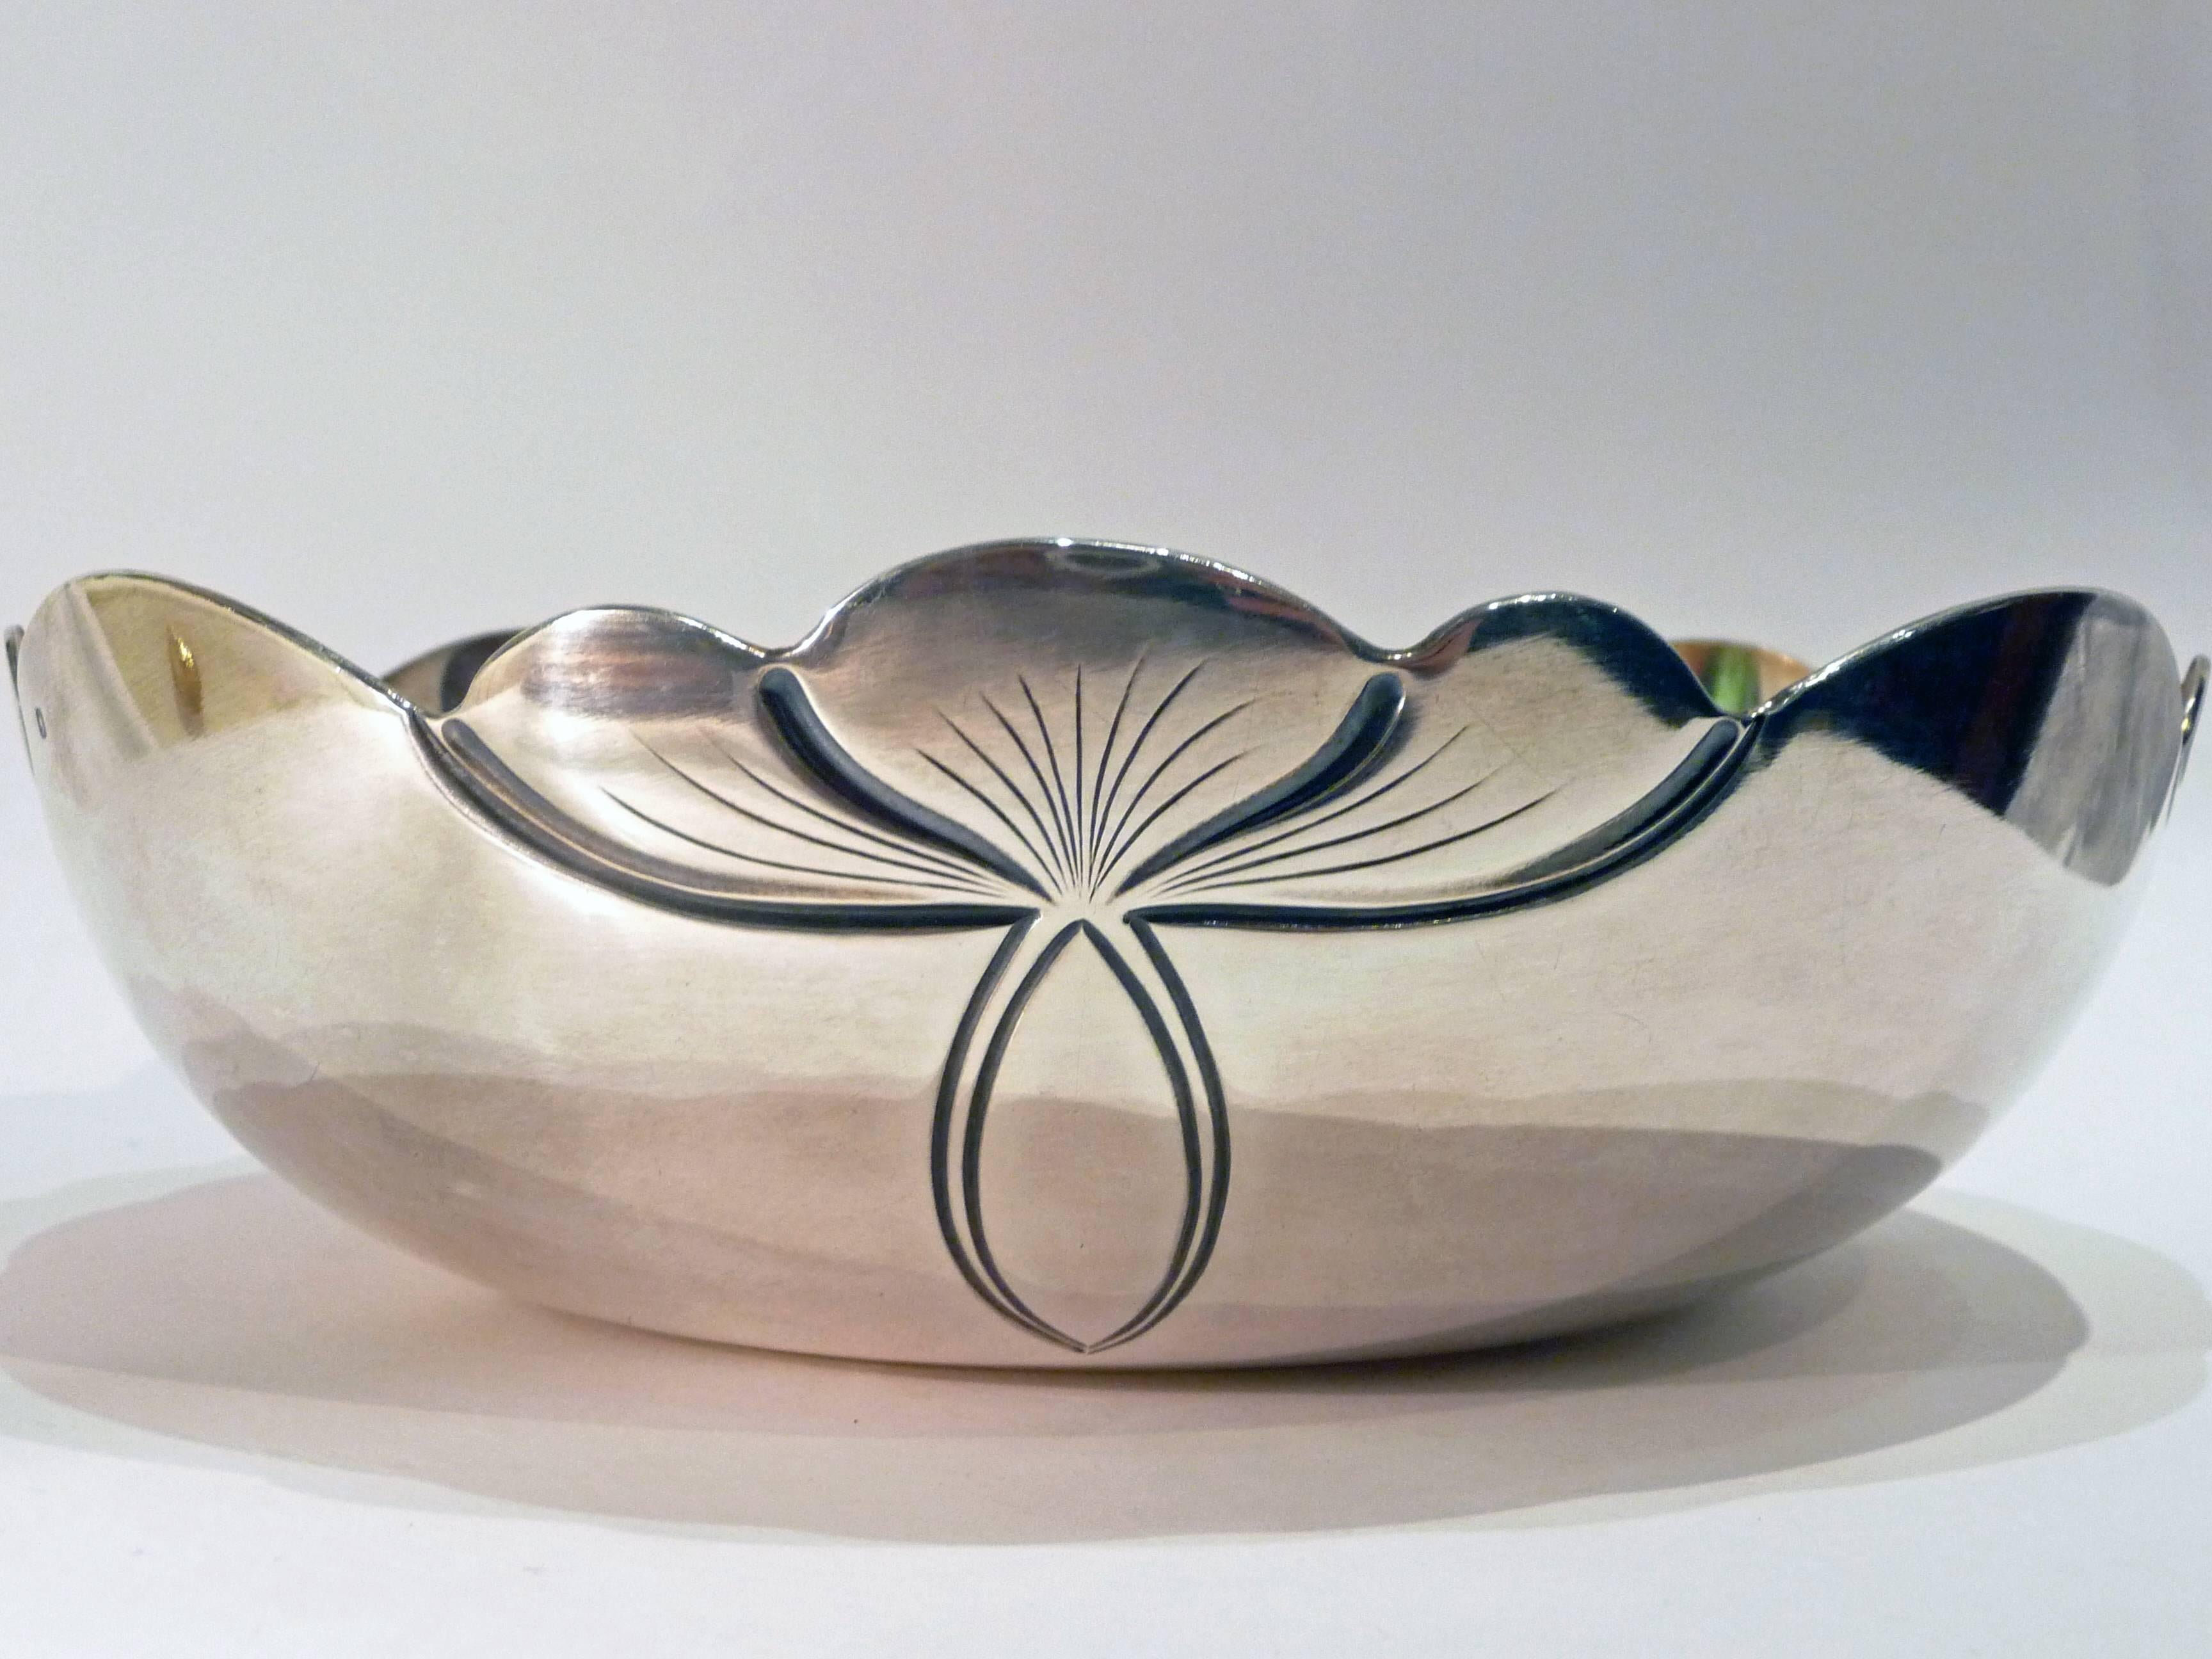 Alphonse Debain.
An Art Nouveau silver bowl decorated with incised stylised flowers.
The design is attributed to Maurice Giot.
With French minerva mark and maker's mark.

